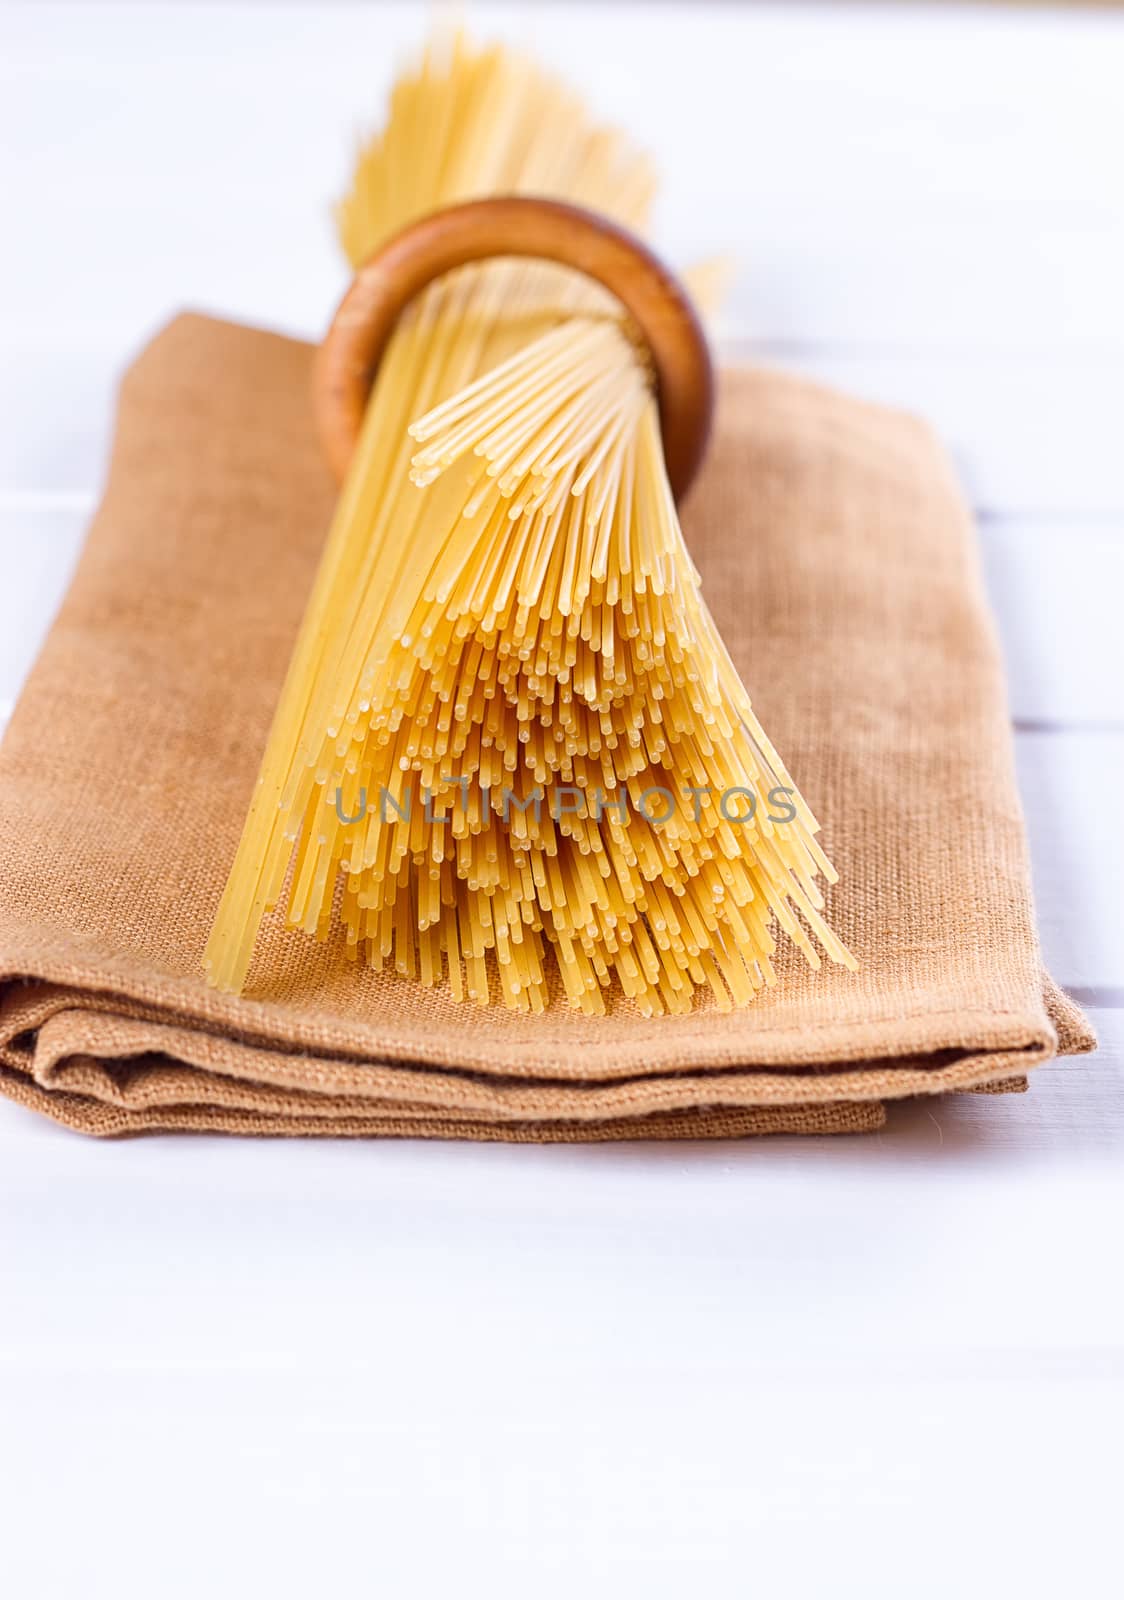 uncooked pasta on a cloth on a white background